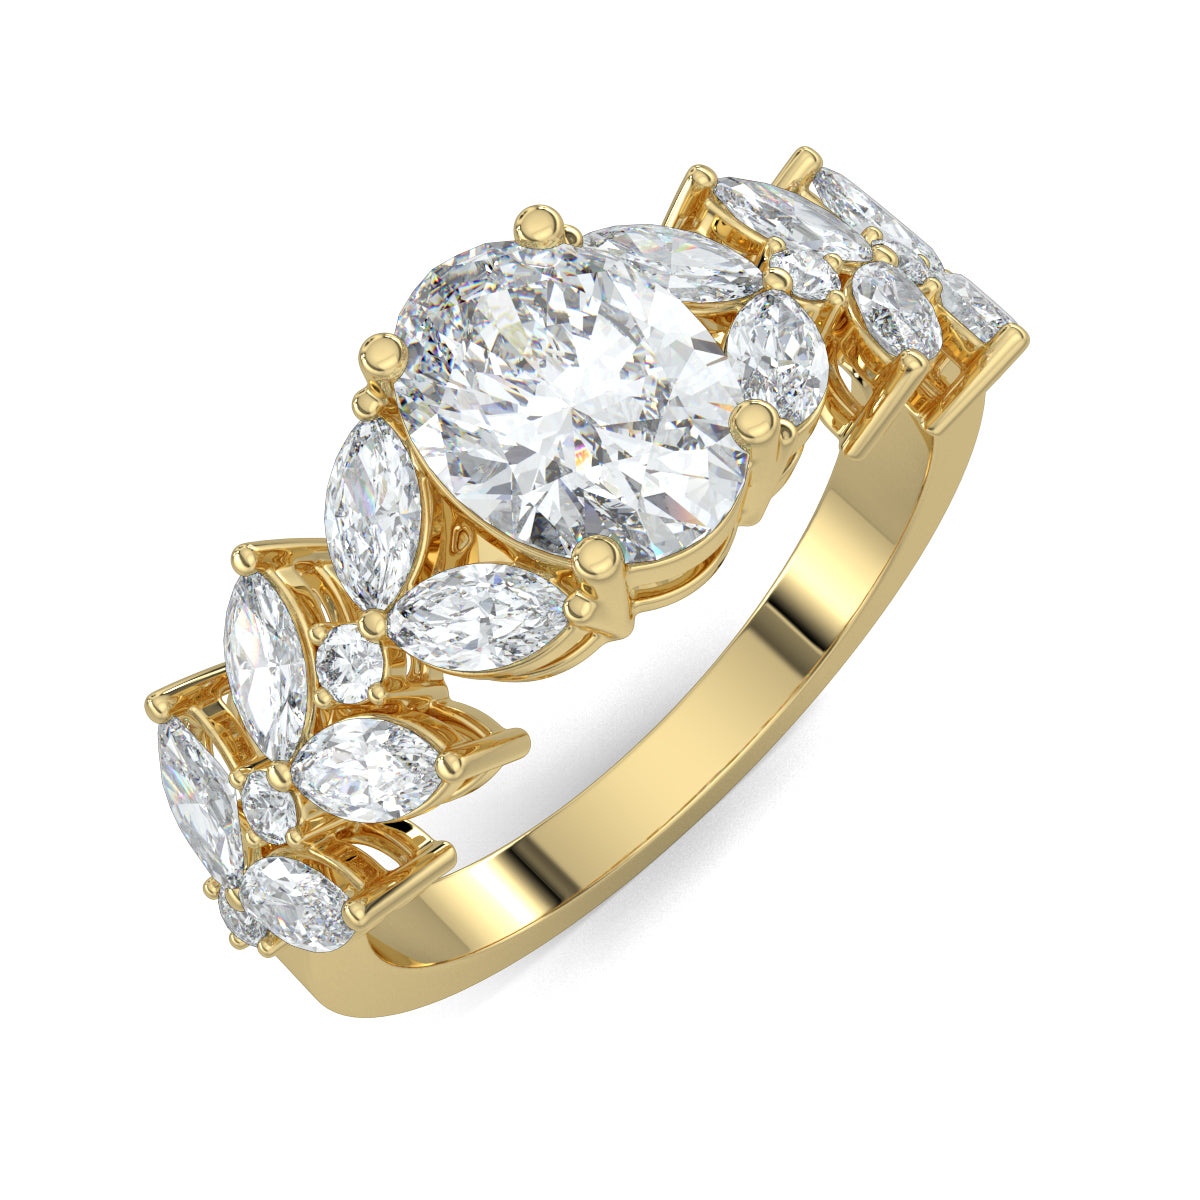 Yellow Gold, Diamond Ring, Galactic Charm Solitaire Ring, Natural Diamonds, Lab-Grown Diamonds, Celestial Jewelry, Oval Cut Diamond, Marquise Cut Diamonds, Classic Band Ring